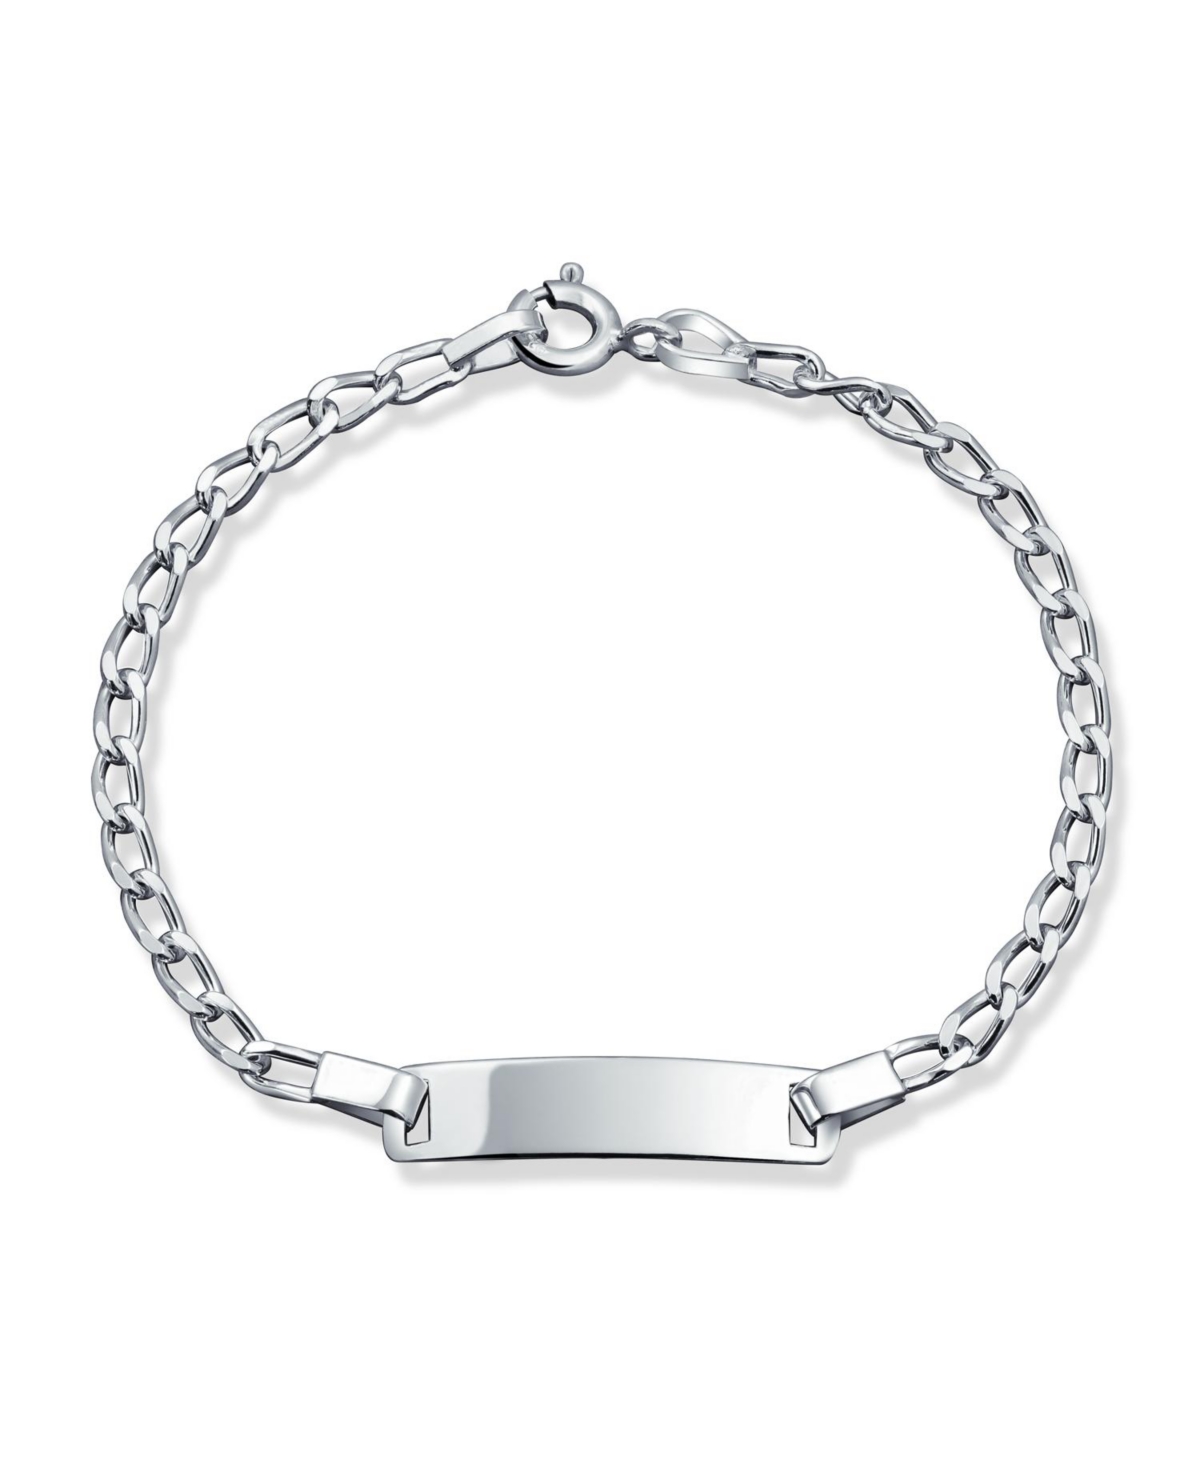 Dainty Engrave Thin Identification Id Bracelet Curb Cuban Link Name Plated.925 Silver Sterling Small Wrist 6 Inch - Silver